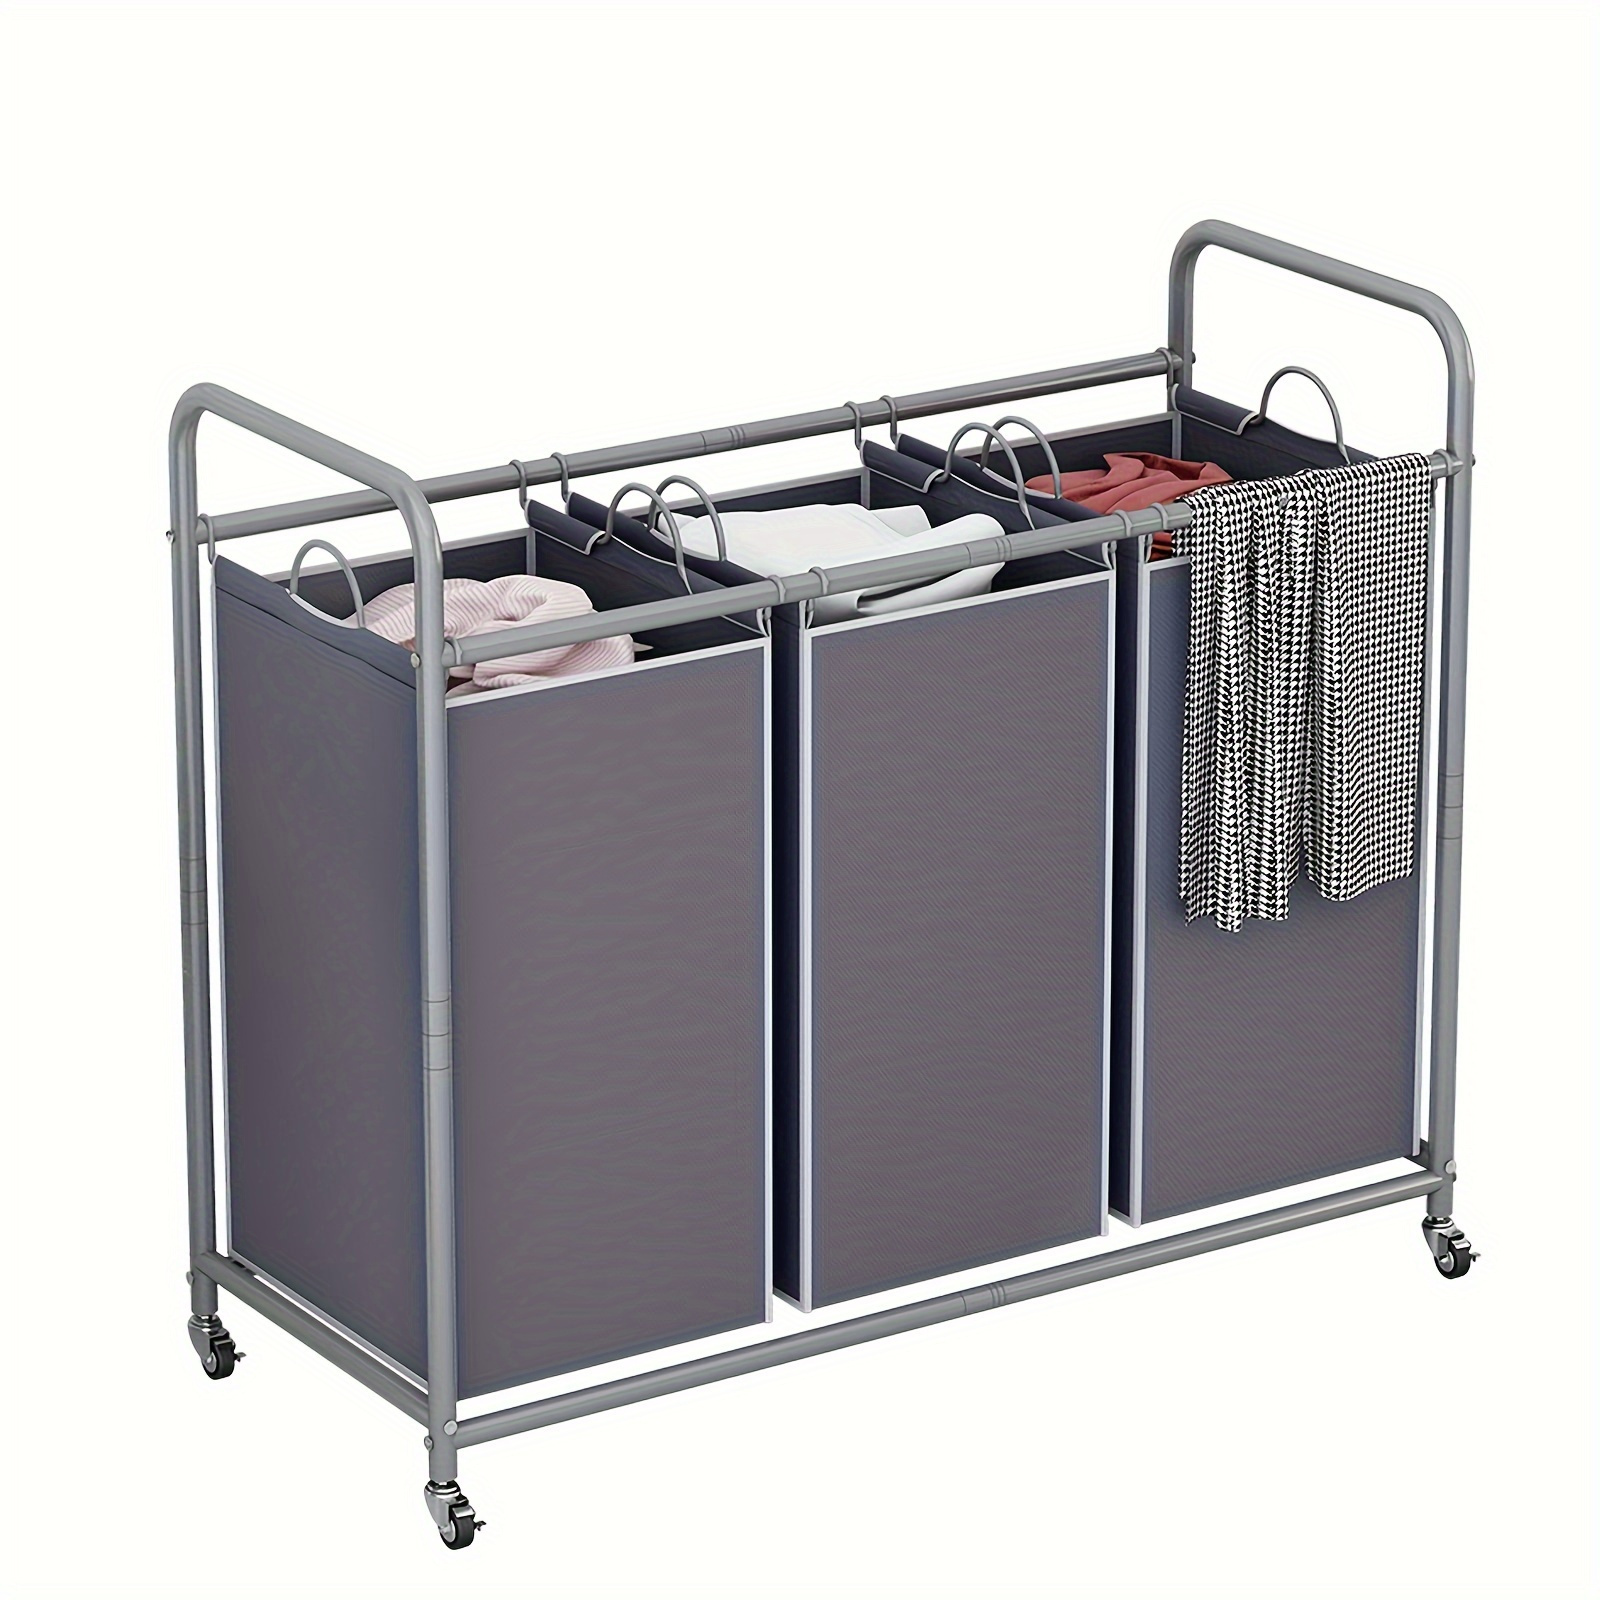 

1pc 3-bag Laundry Basket Sorter, Laundry Hamper Cart With Heavy Duty Rolling Lockable Wheels And Removable Bags